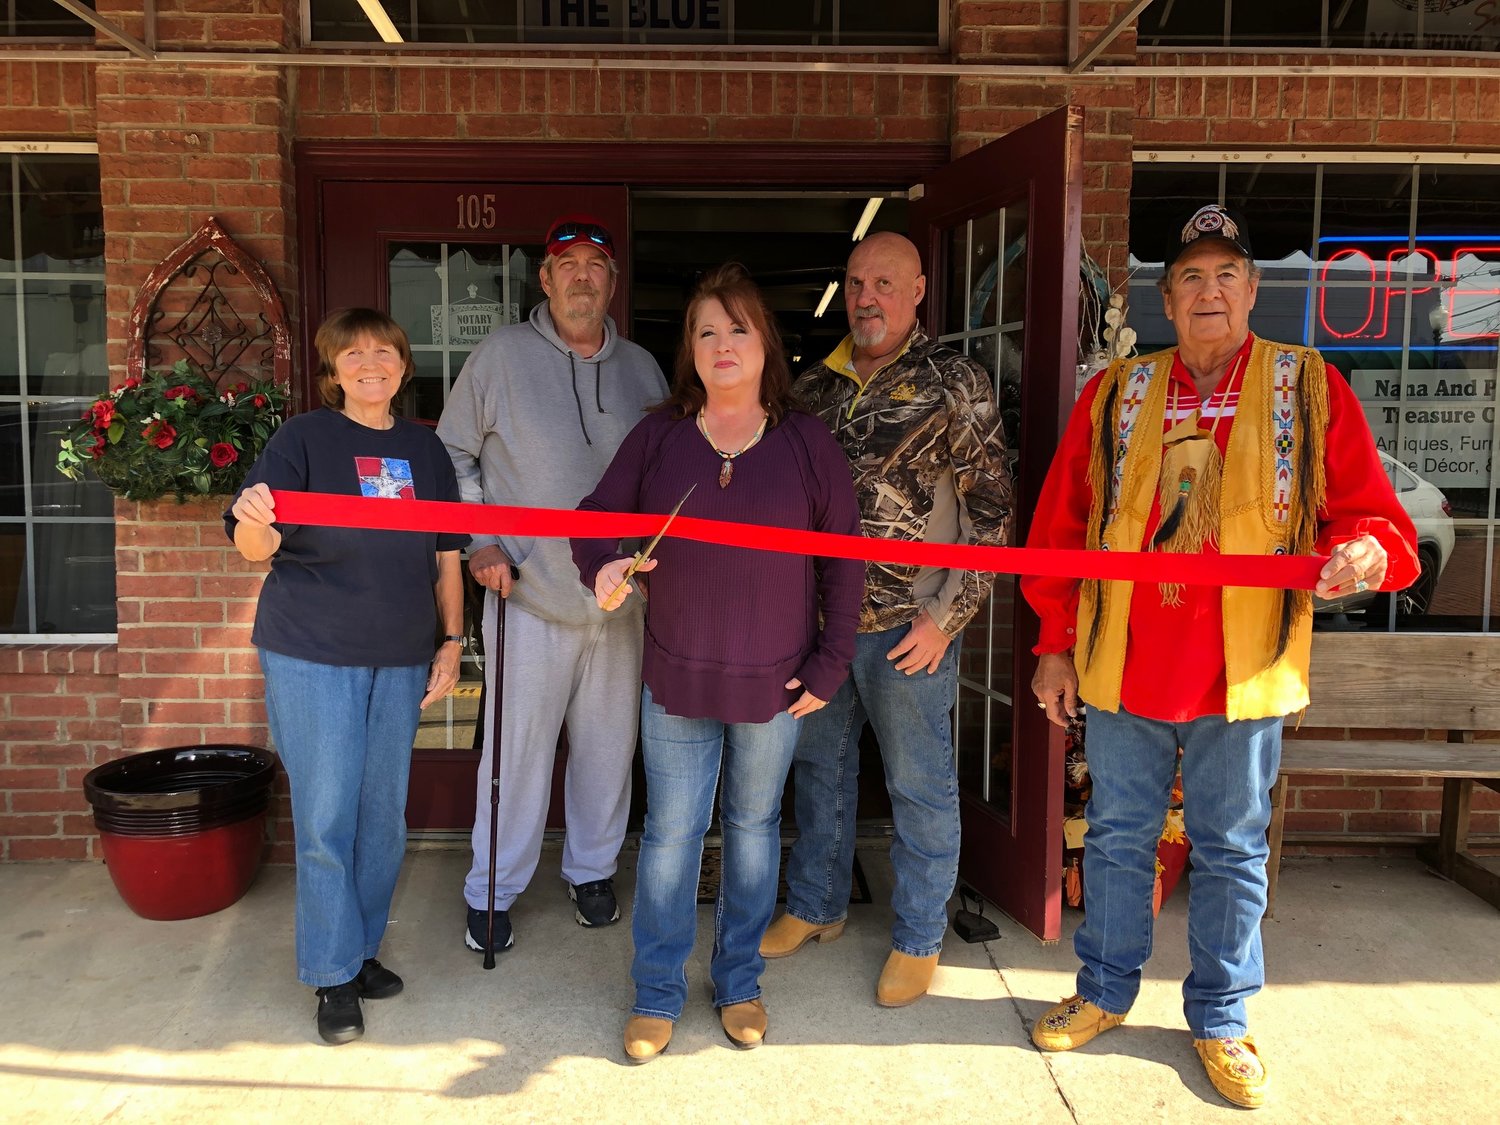 A ribbon cutting was held recently by the Mineola Chamber of Commerce at the new location of Nana and Papa’s Treasure Chest at 105 South Johnson St. in Mineola.